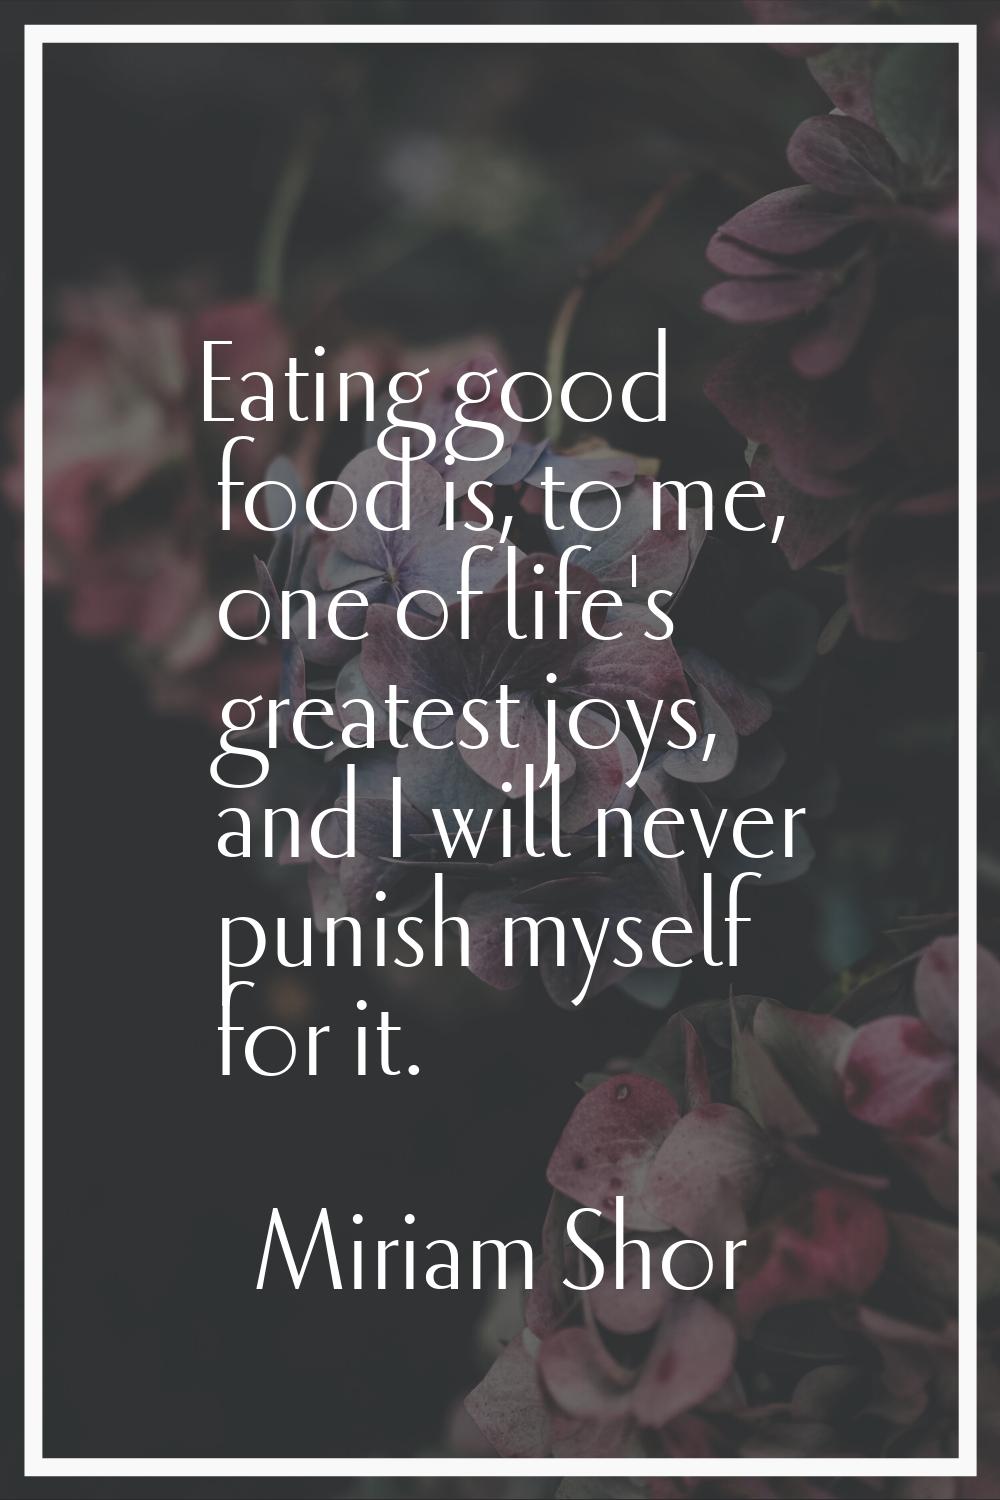 Eating good food is, to me, one of life's greatest joys, and I will never punish myself for it.